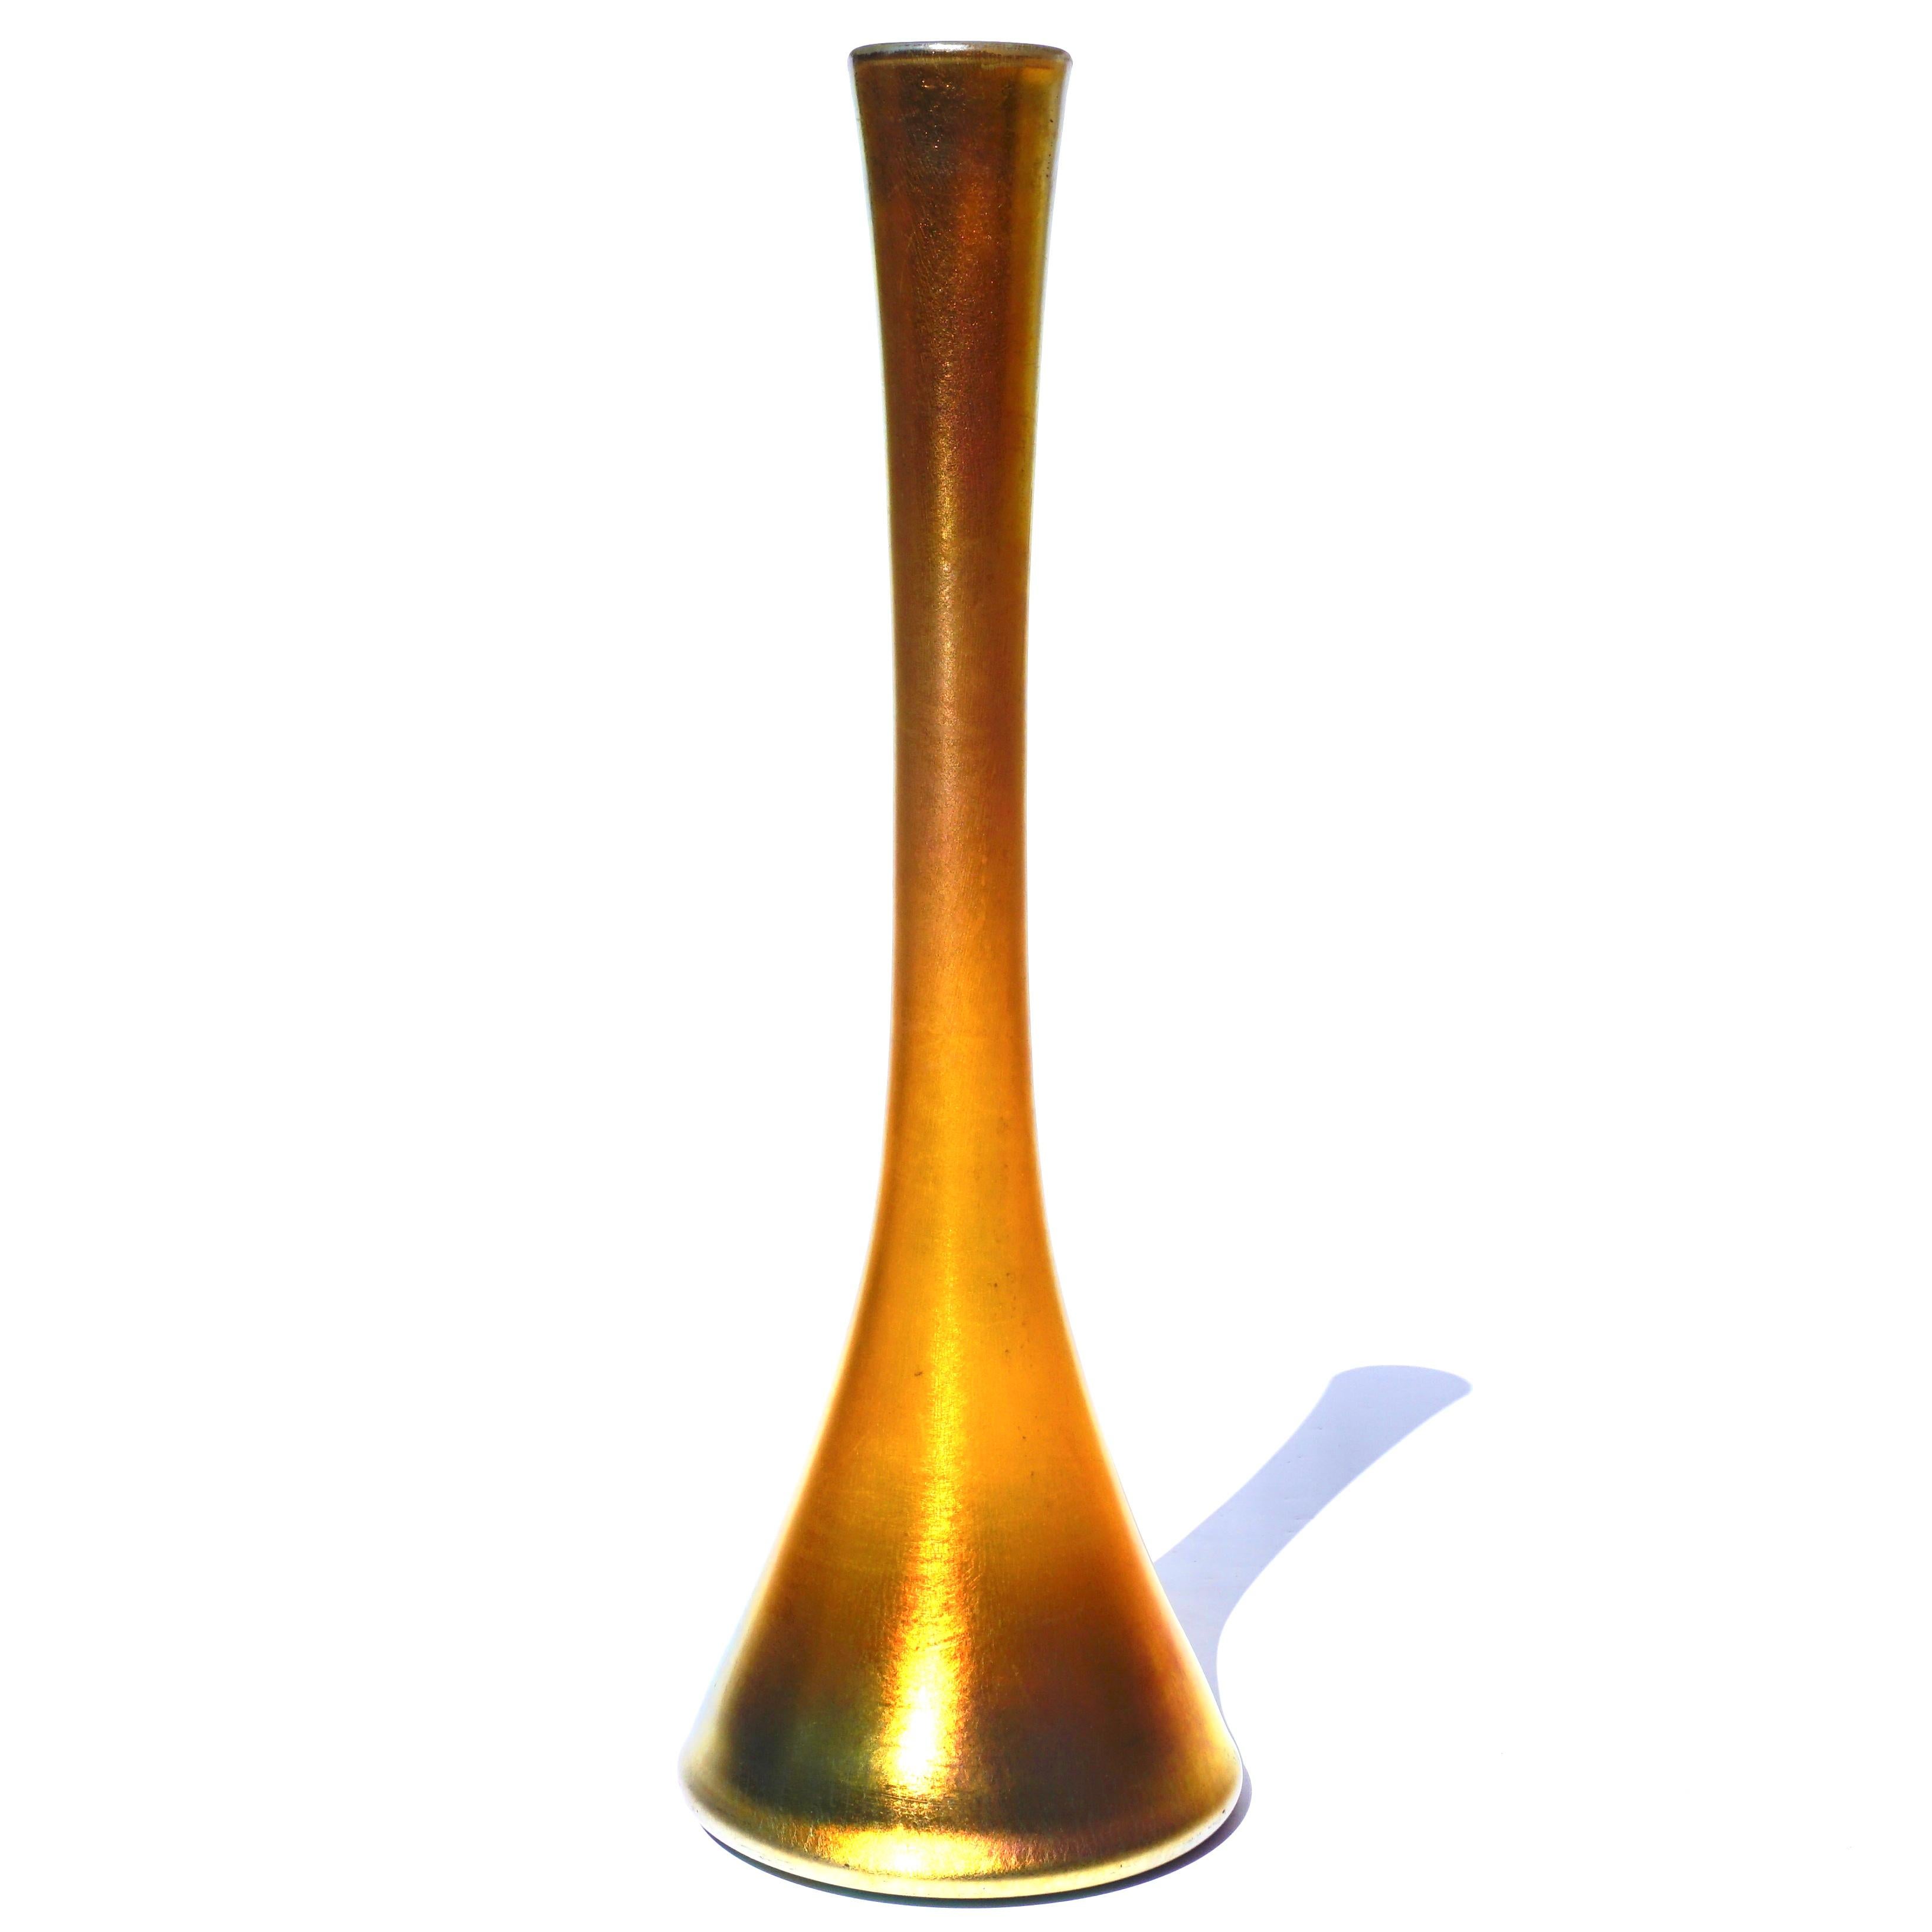 A large 16.5 inch gold favrile Bottle vase, circa 1900 Art Nouveau.

Marks: 6505, K, L.C. Tiffany, Favrile
Measures: Height 16.5 inches (41.9 cm) 
Diameter 5.5 inches (13.7 cm)

Condition: Very good with minor losses to iridescence.

AVANTIQUES is